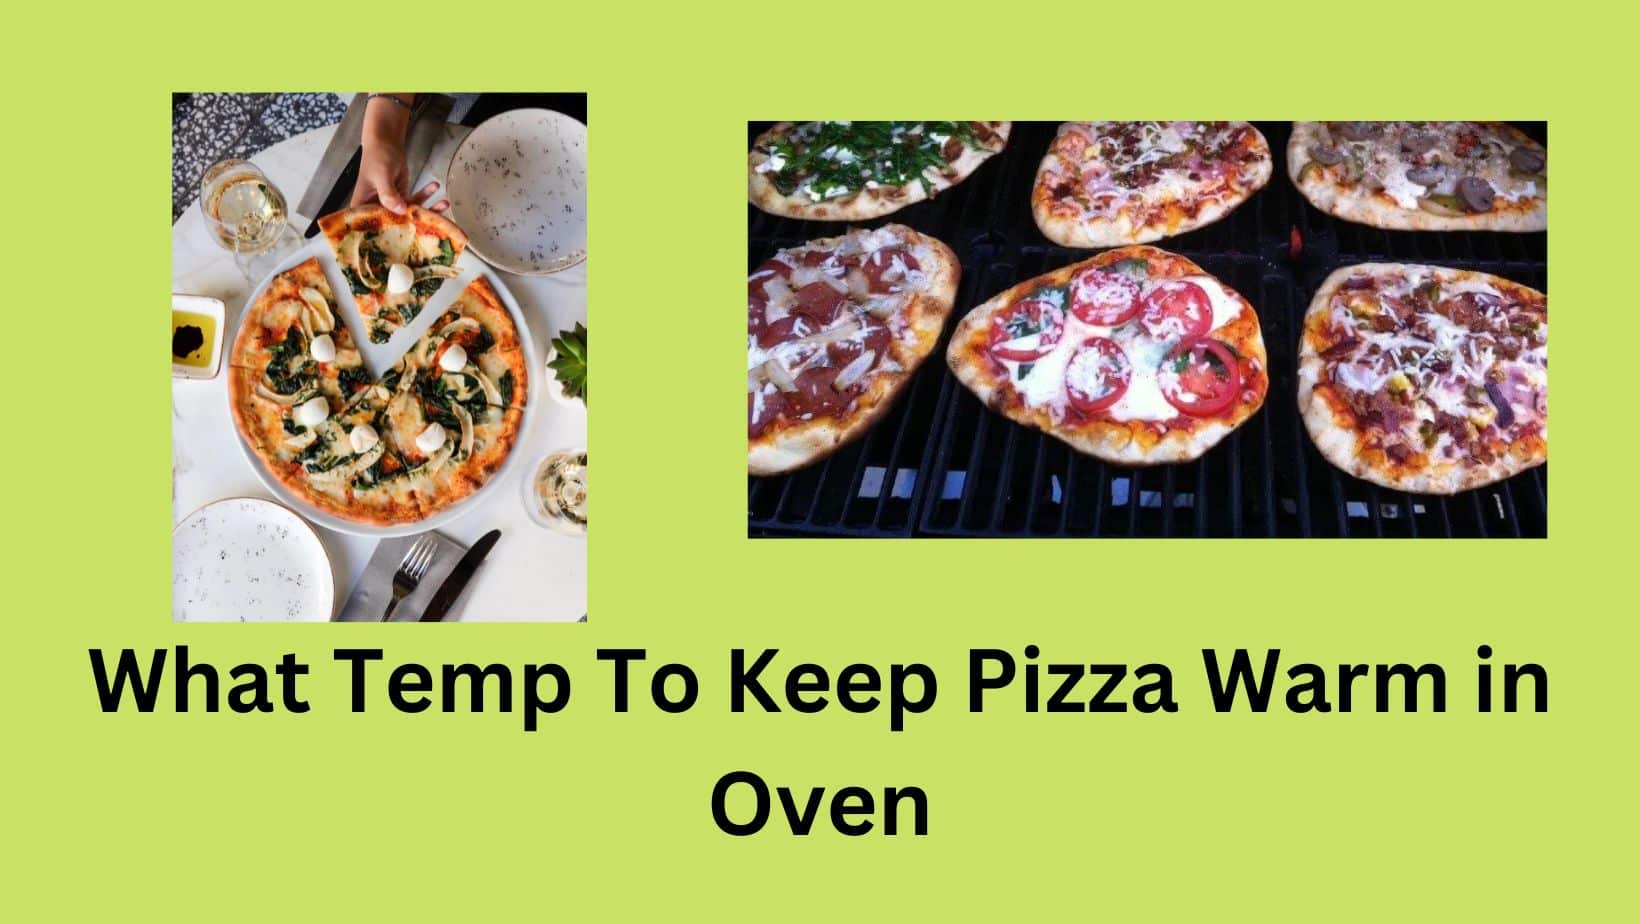 What Temp To Keep Pizza Warm in Oven